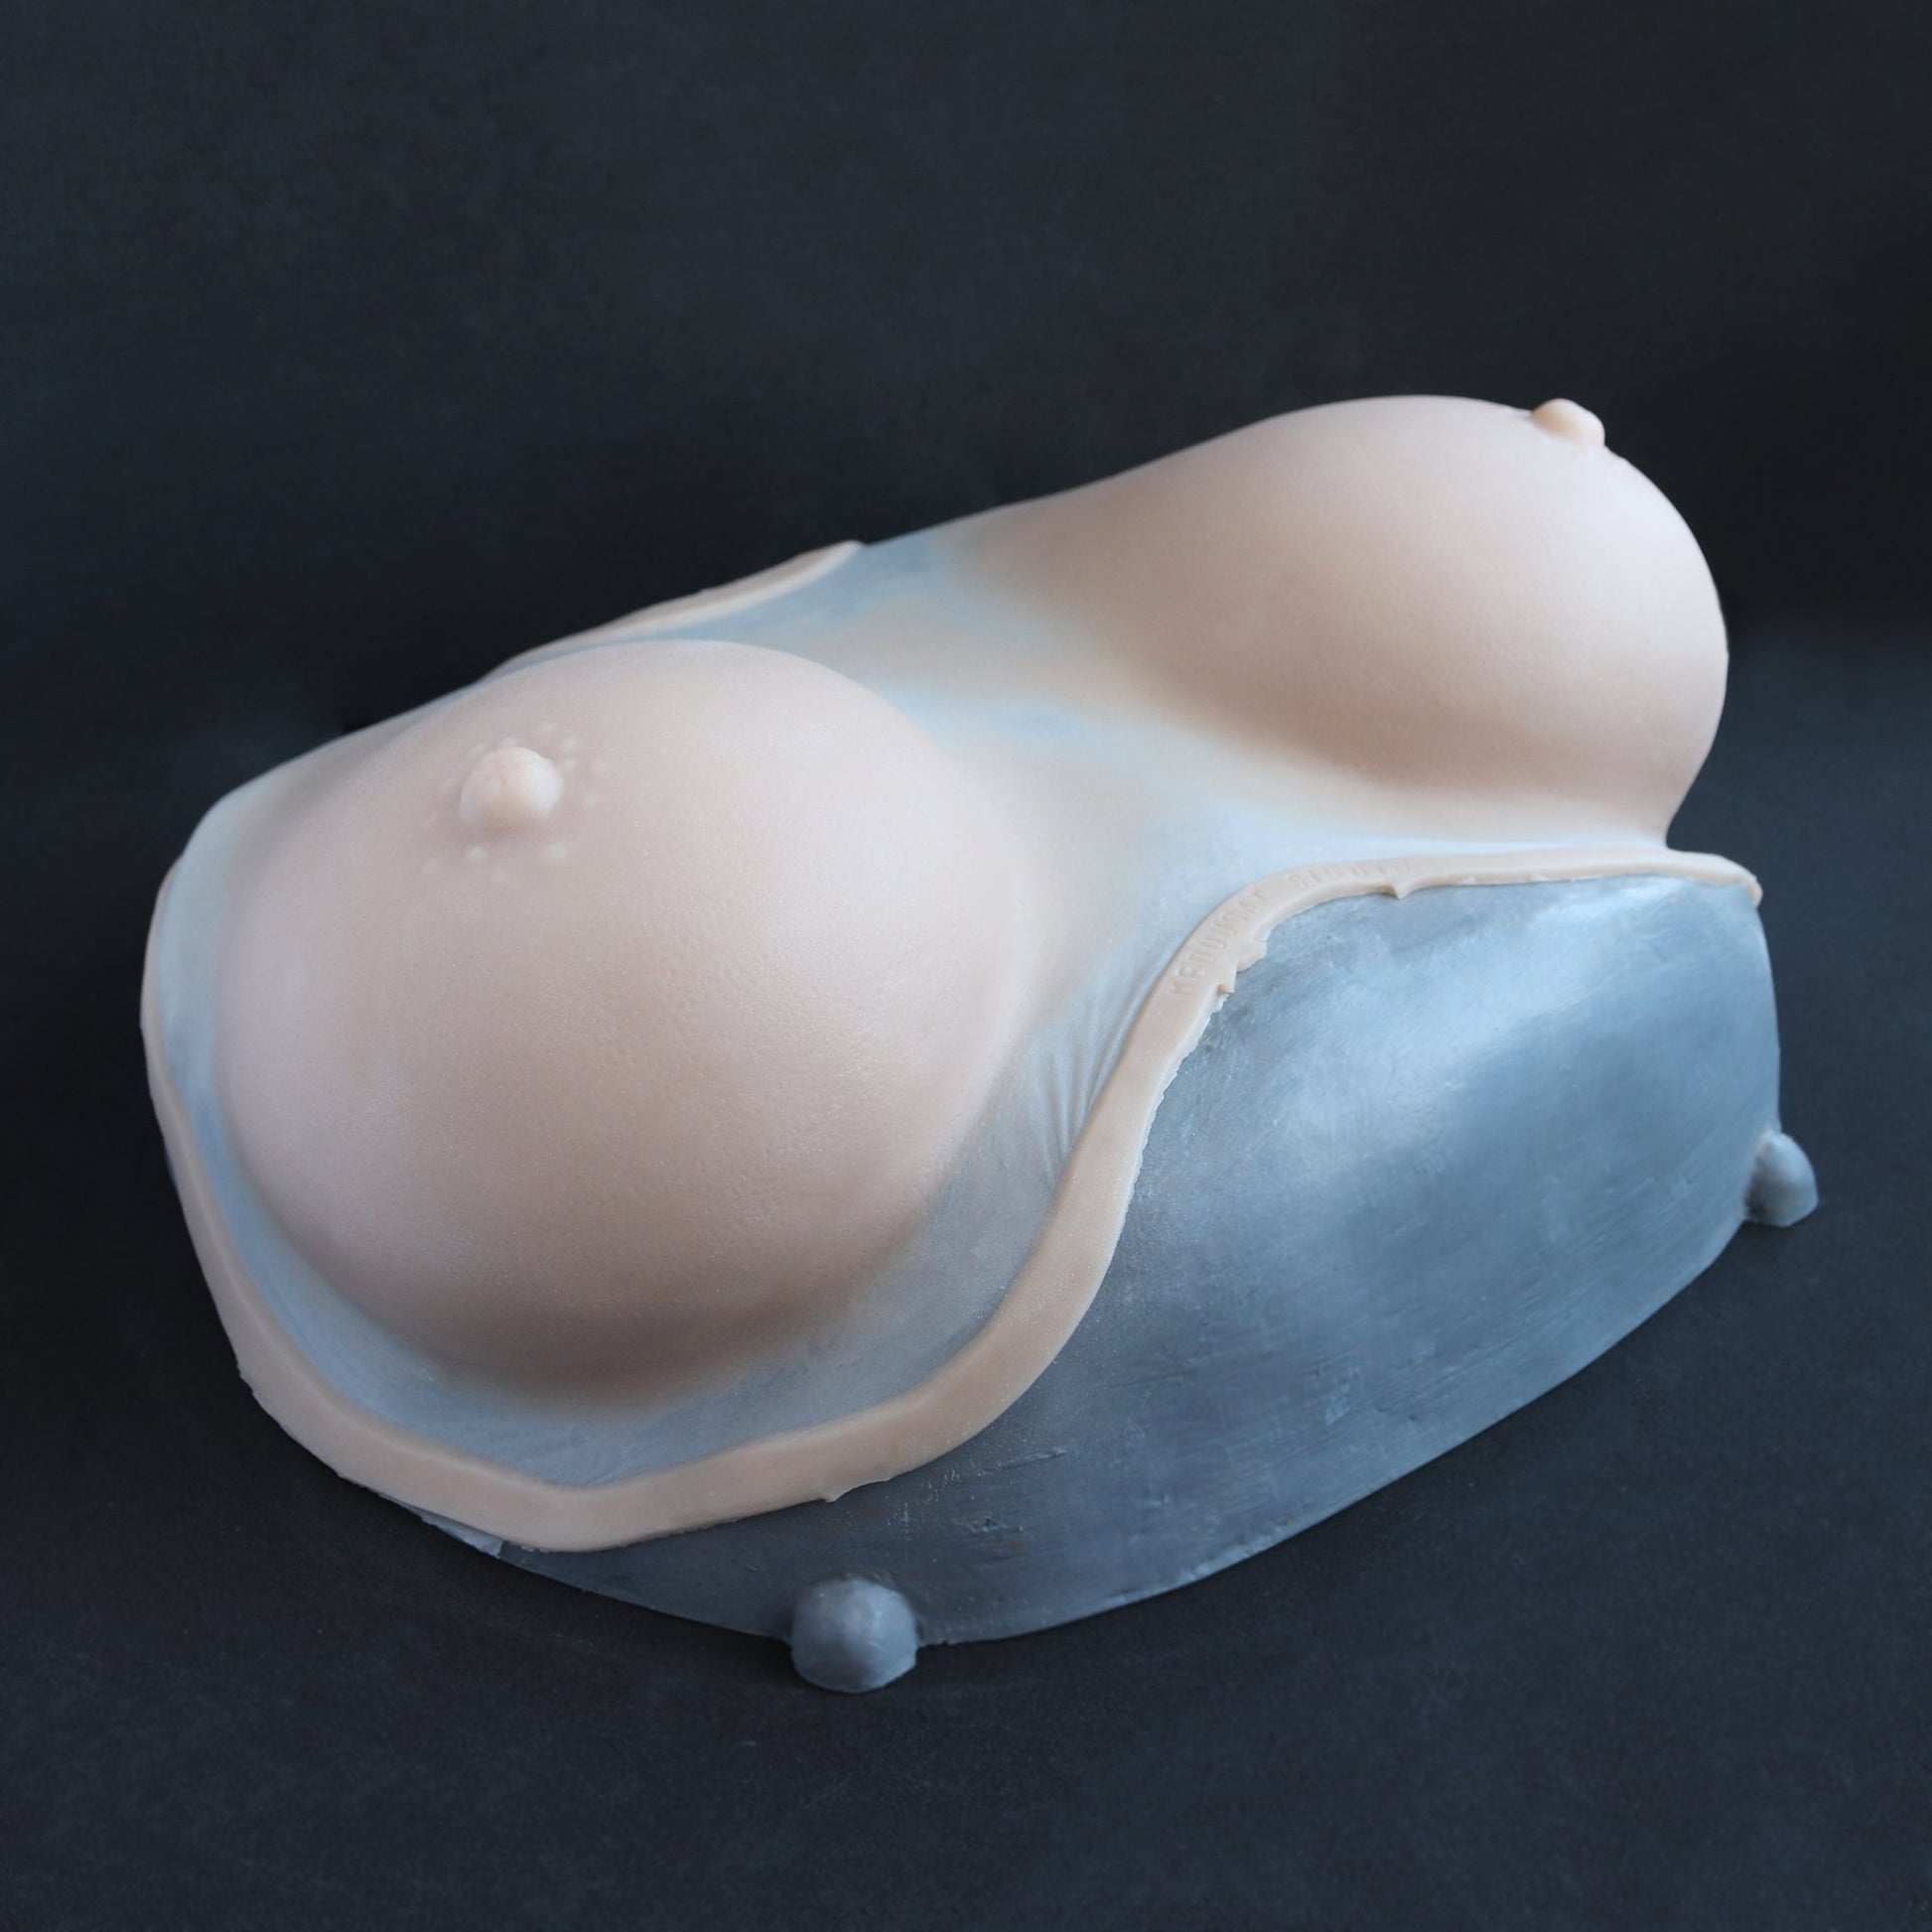 Breast Prosthetics - Silicone makeup prosthetic in vanilla shade on a black surface